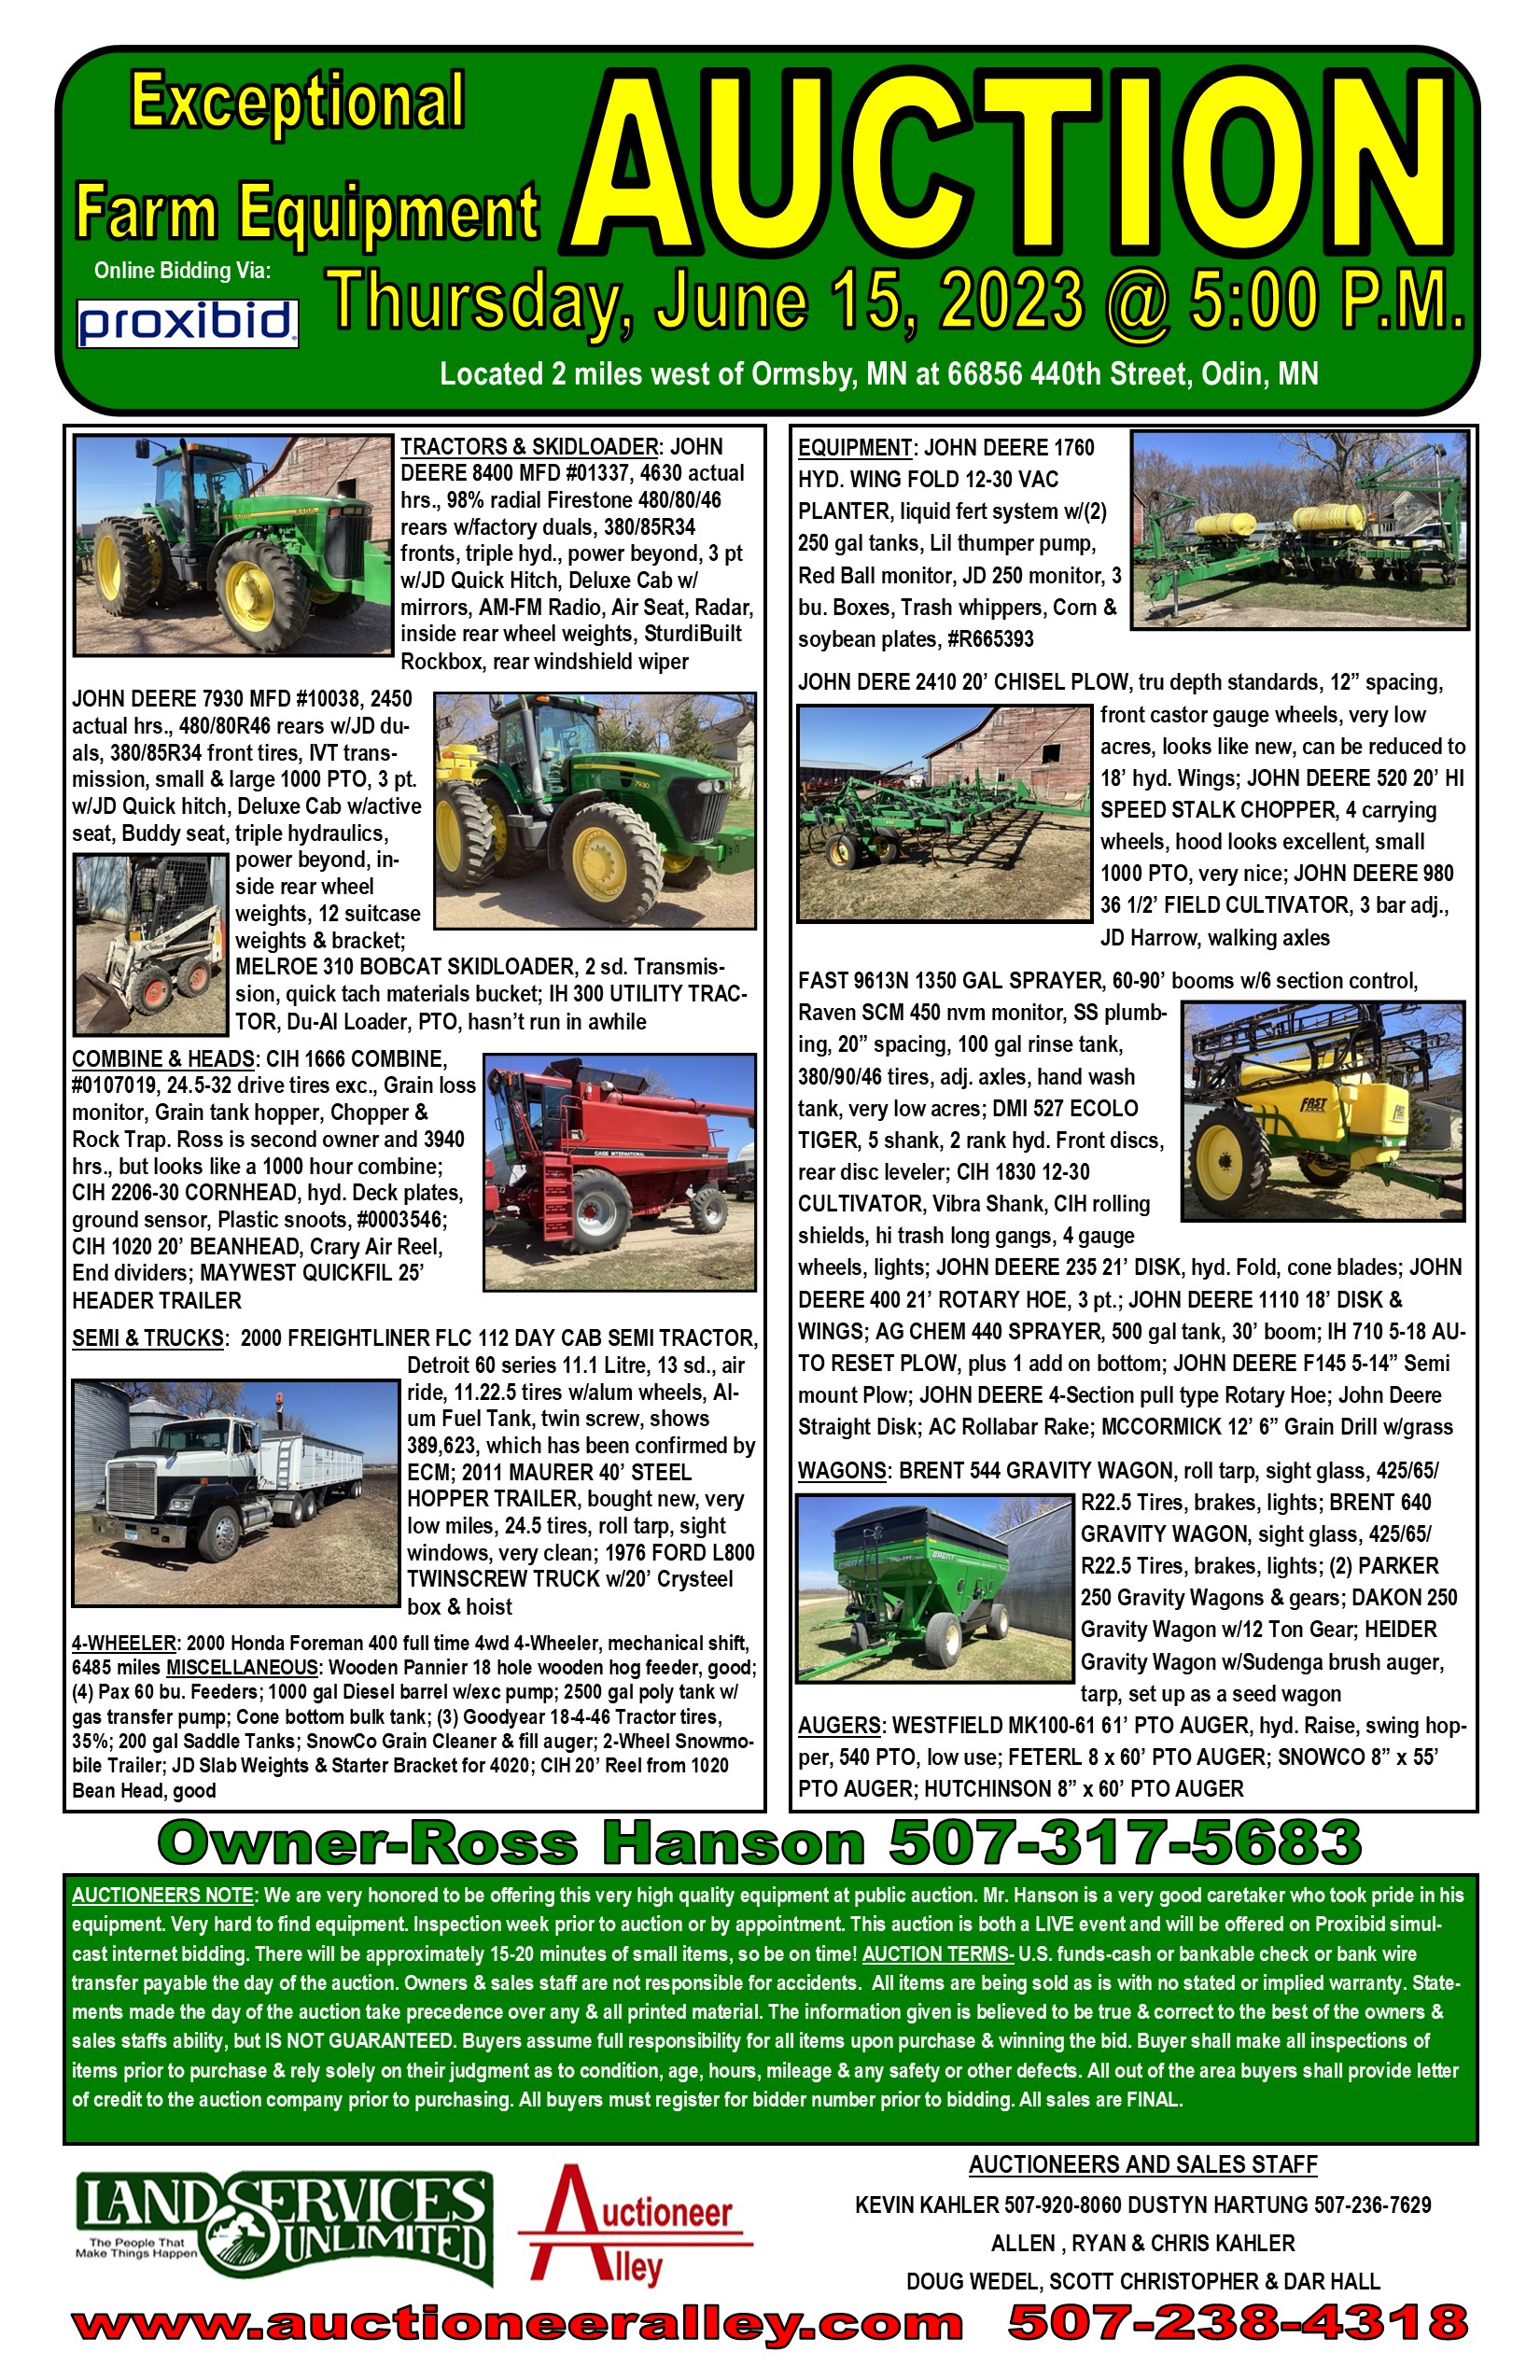 Machinery Auction - Land Services Unlimited